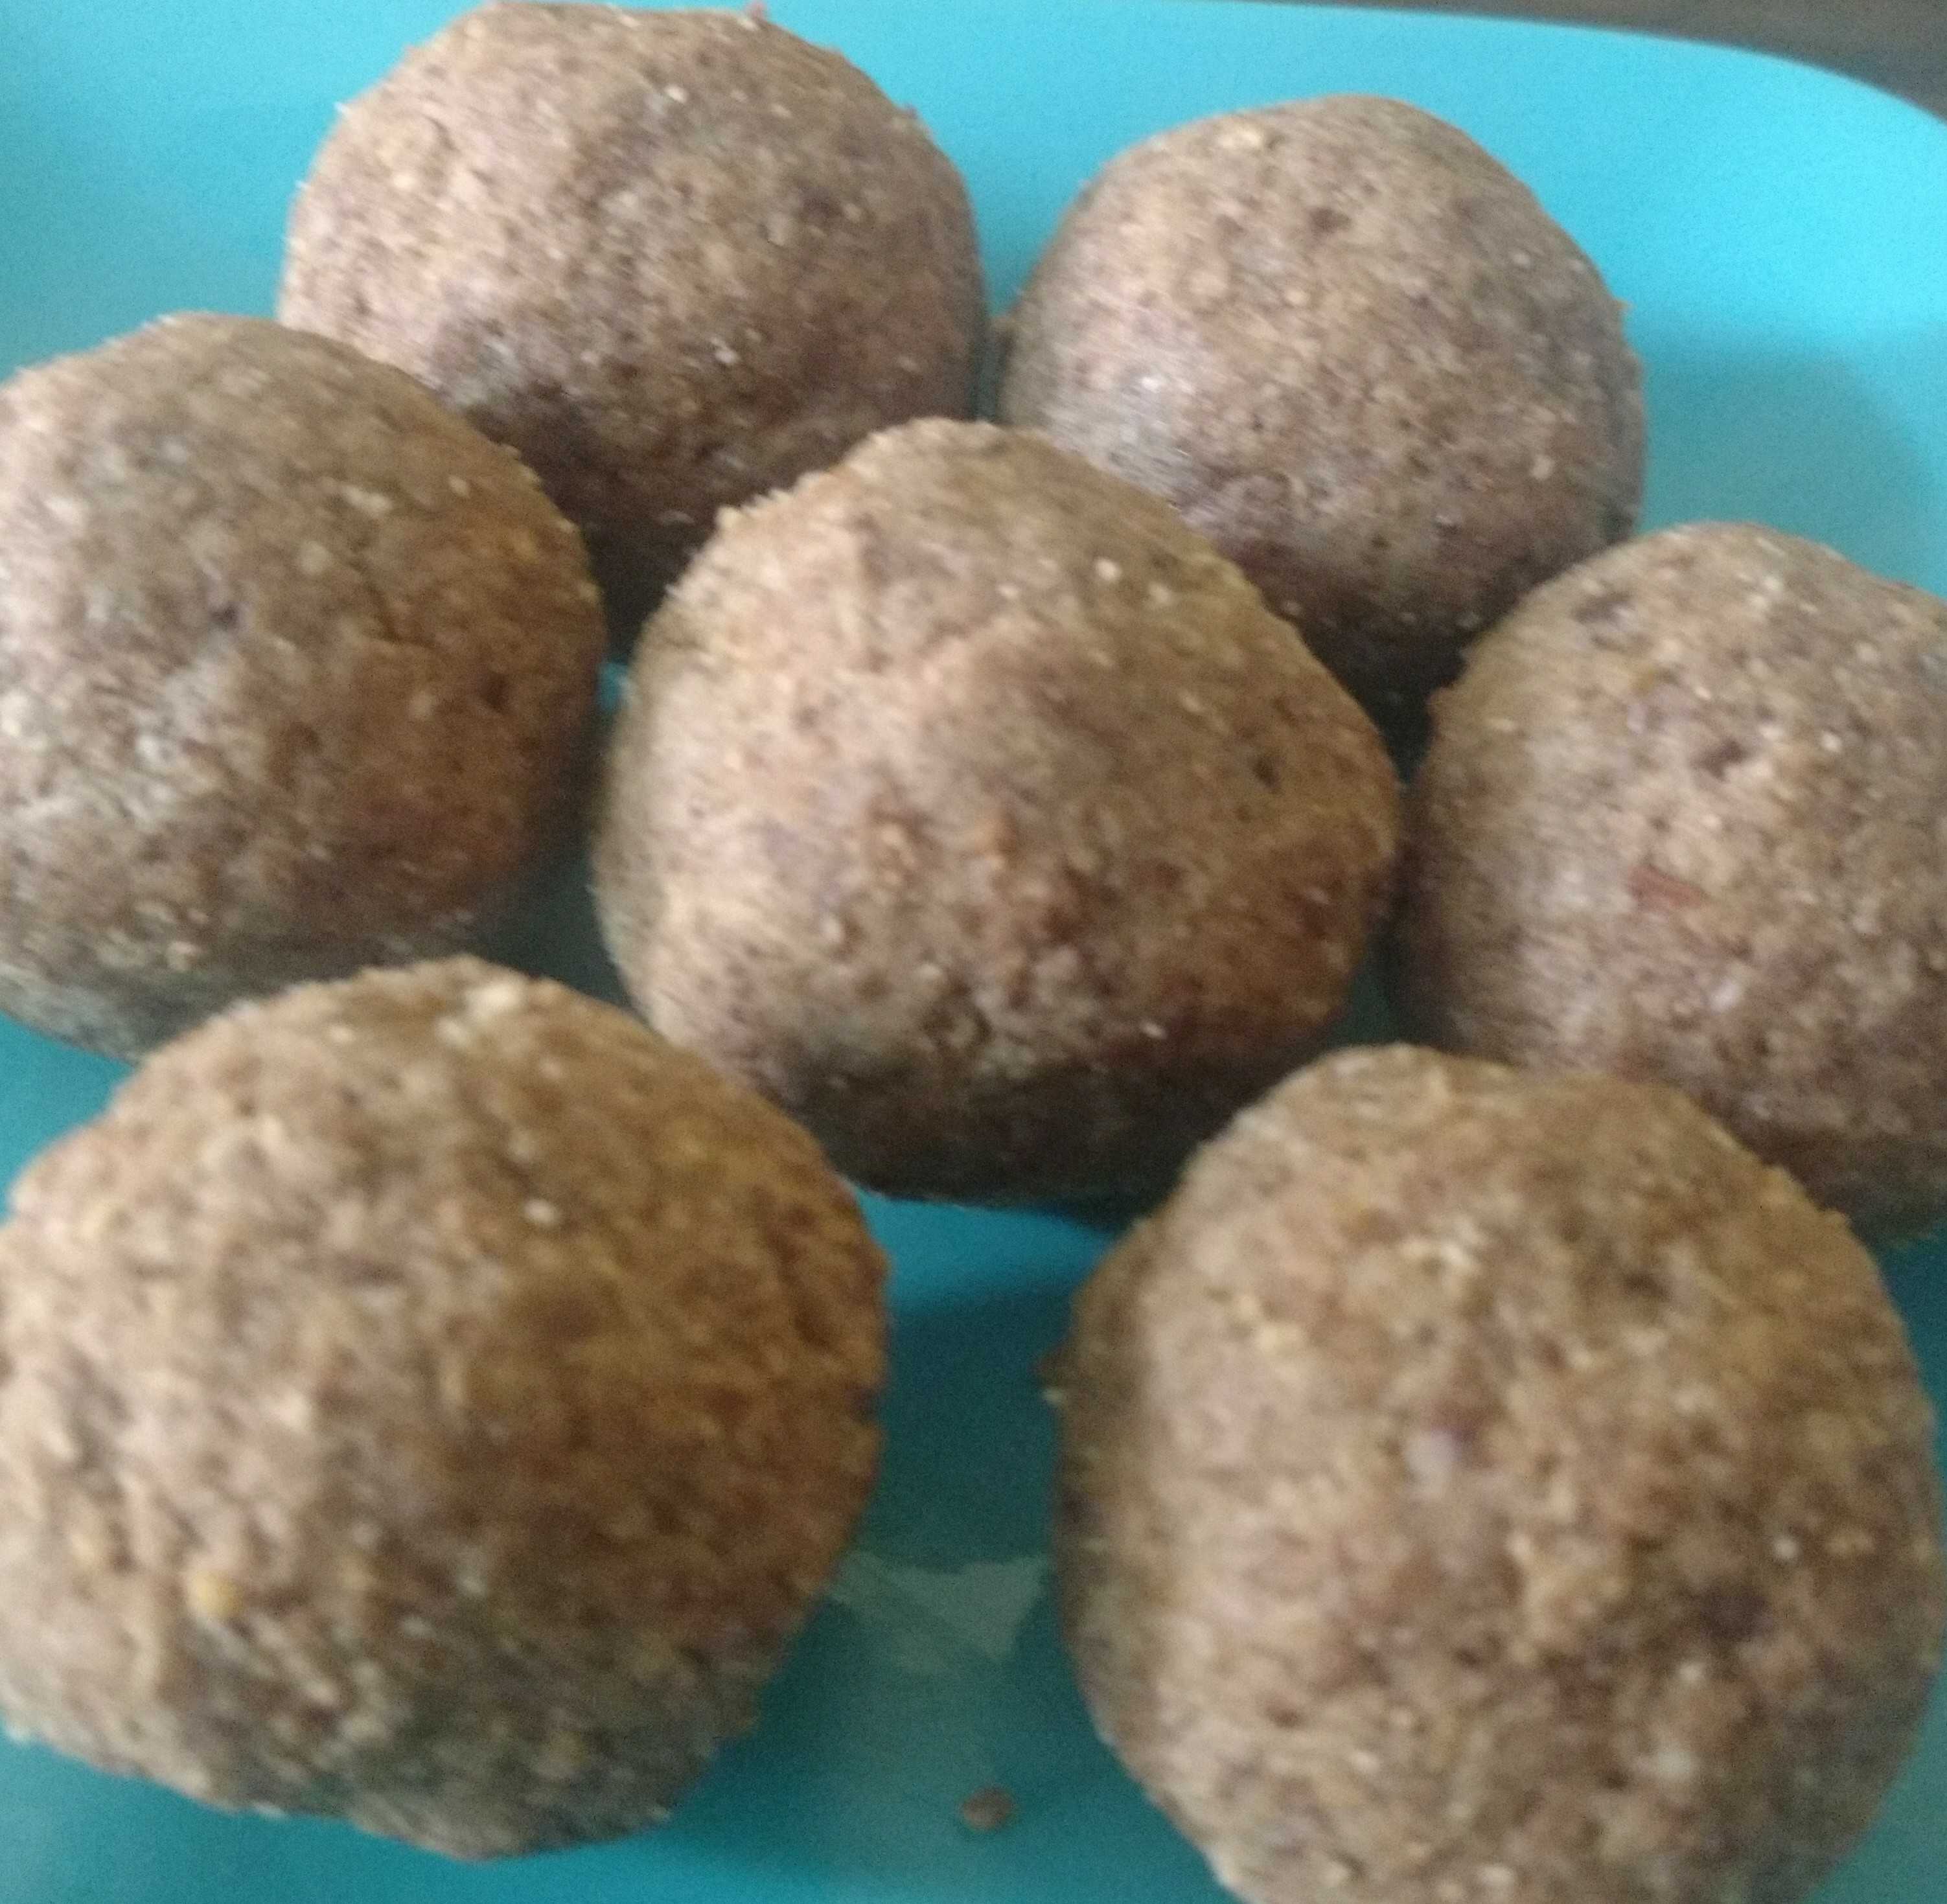 Protein Ladoo(Nuts Laddo)